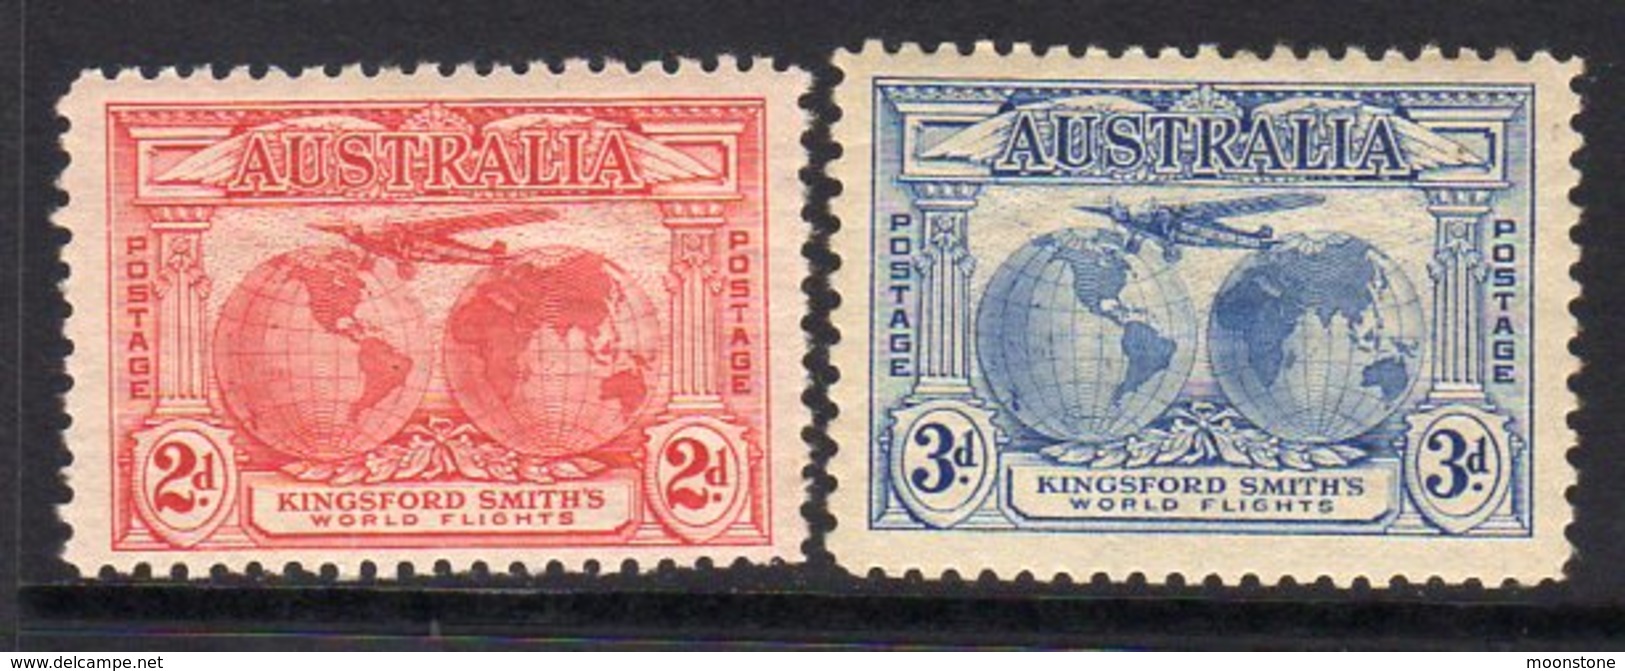 Australia 1931 Kingsford Smith Postage Values Set Of 2, Hinged Mint (SG121/2) - Mint Stamps